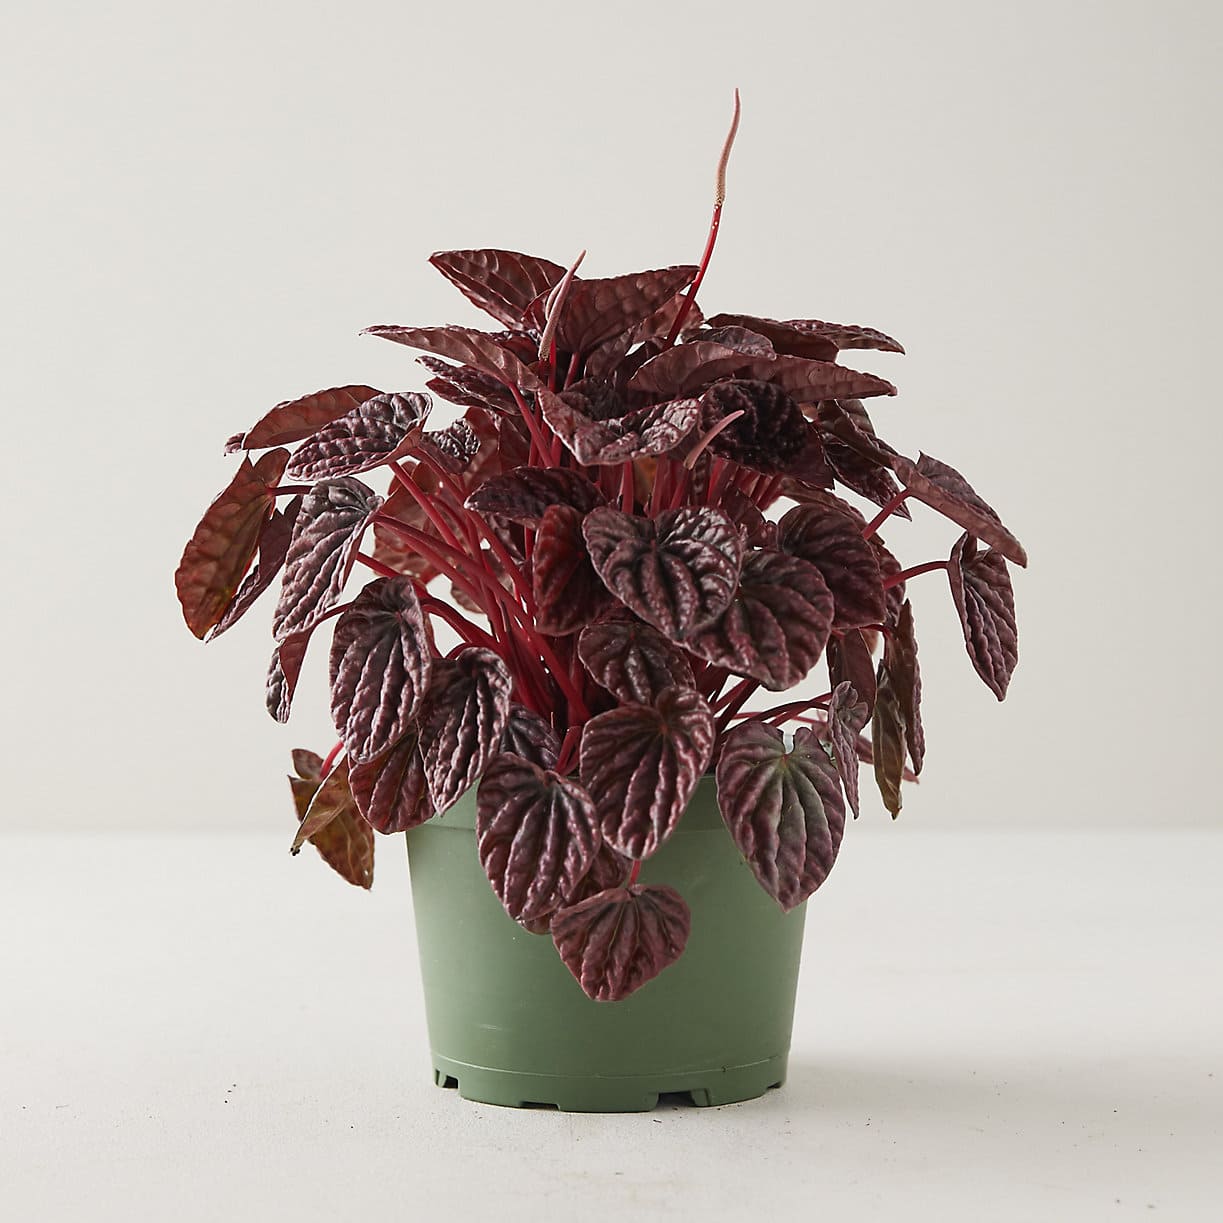 Appealing red heart-shaped houseplants to decorate your home more charming - 83